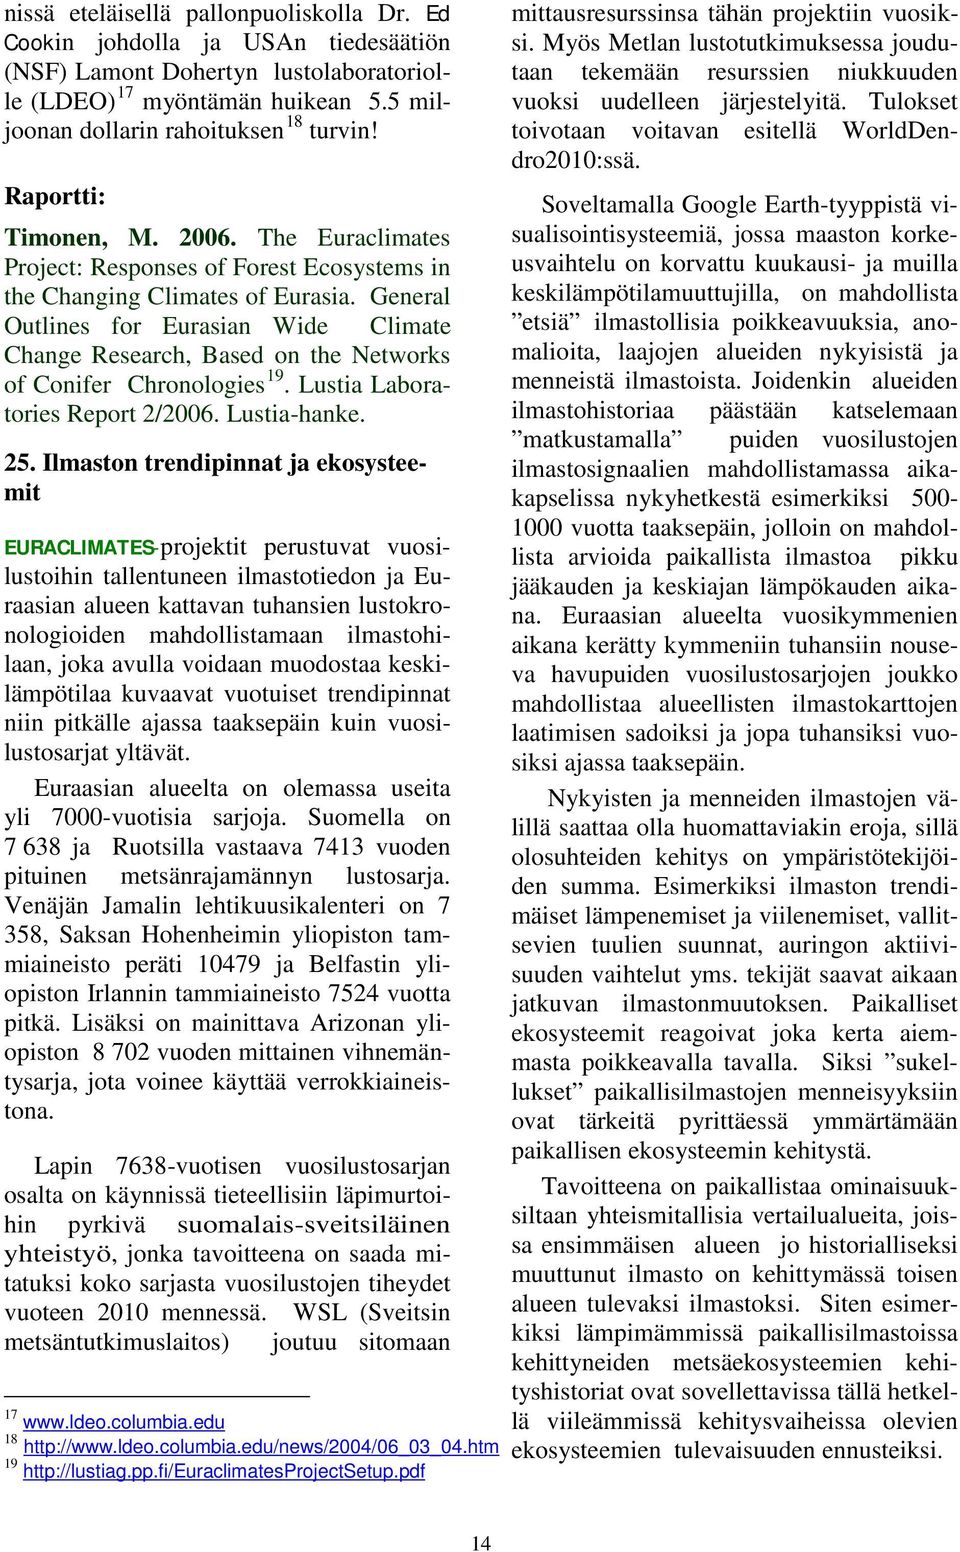 General Outlines for Eurasian Wide Climate Change Research, Based on the Networks of Conifer Chronologies 19. Lustia Laboratories Report 2/2006. Lustia-hanke. 25.